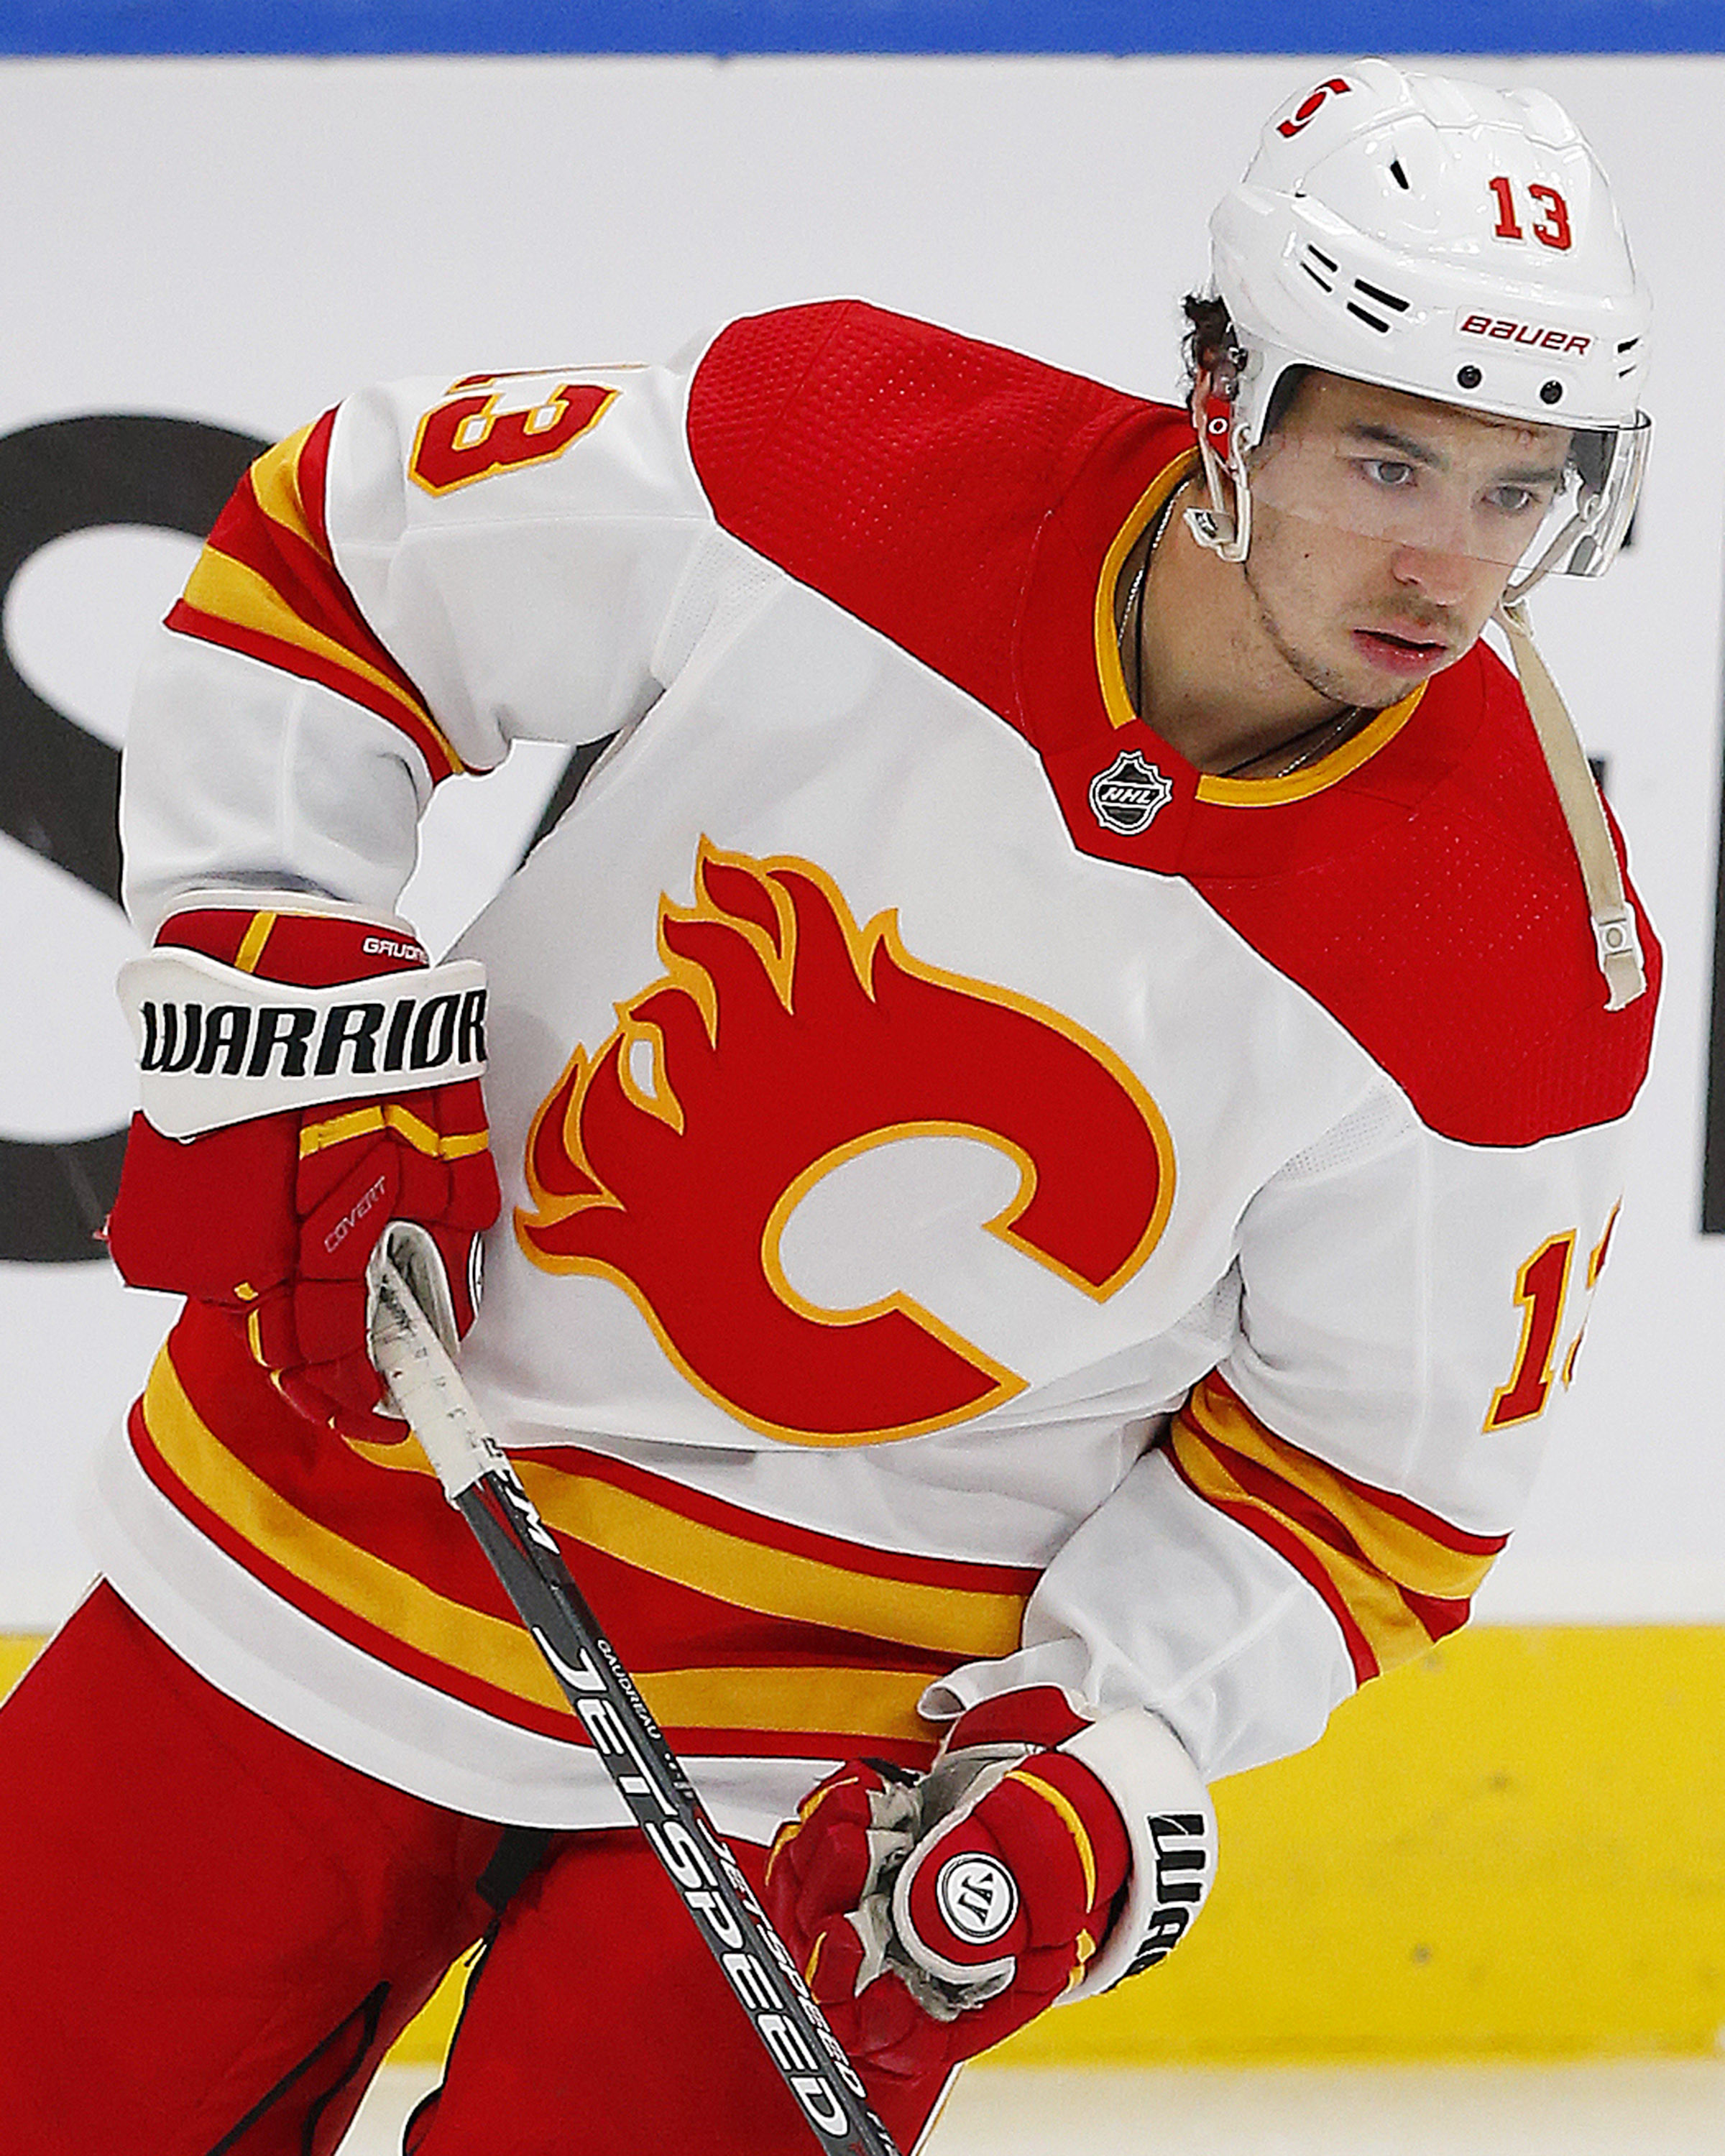 The Morning After New Jersey: Johnny Gaudreau Is Good At Hockey